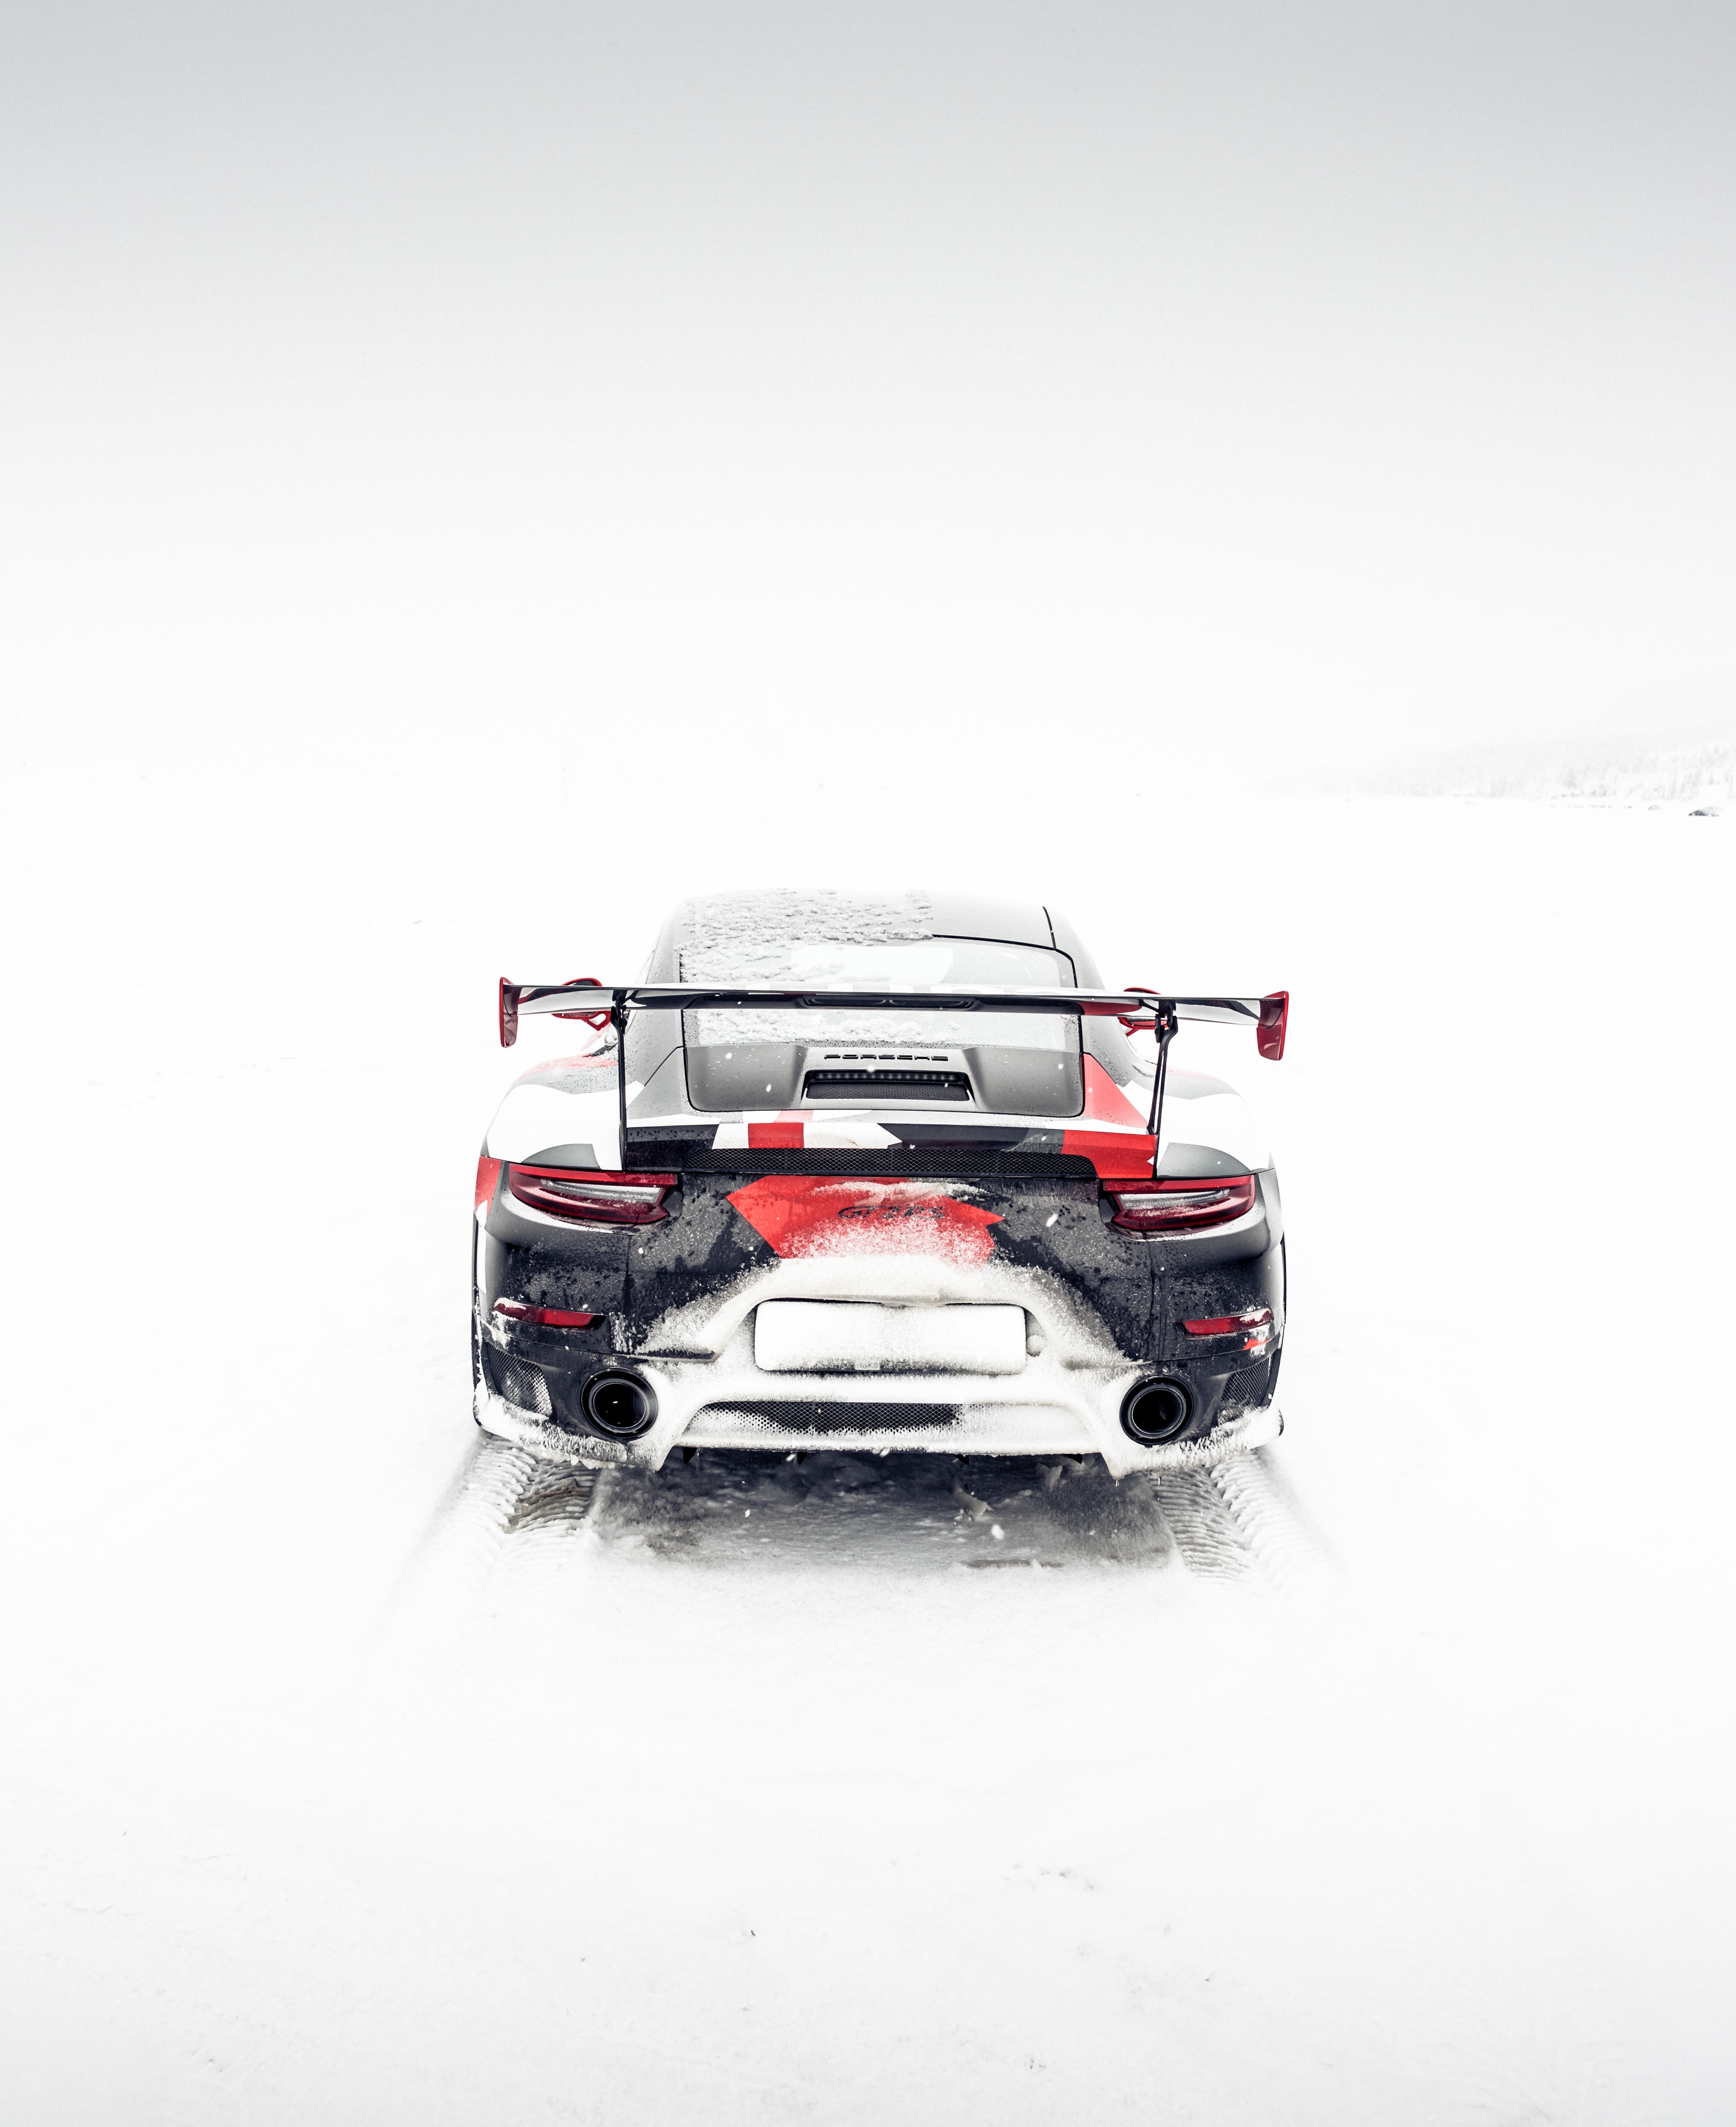 New Lock Screen Wallpapers rear view, sports, winter, snow, cars, sports car, back view, off road, impassability